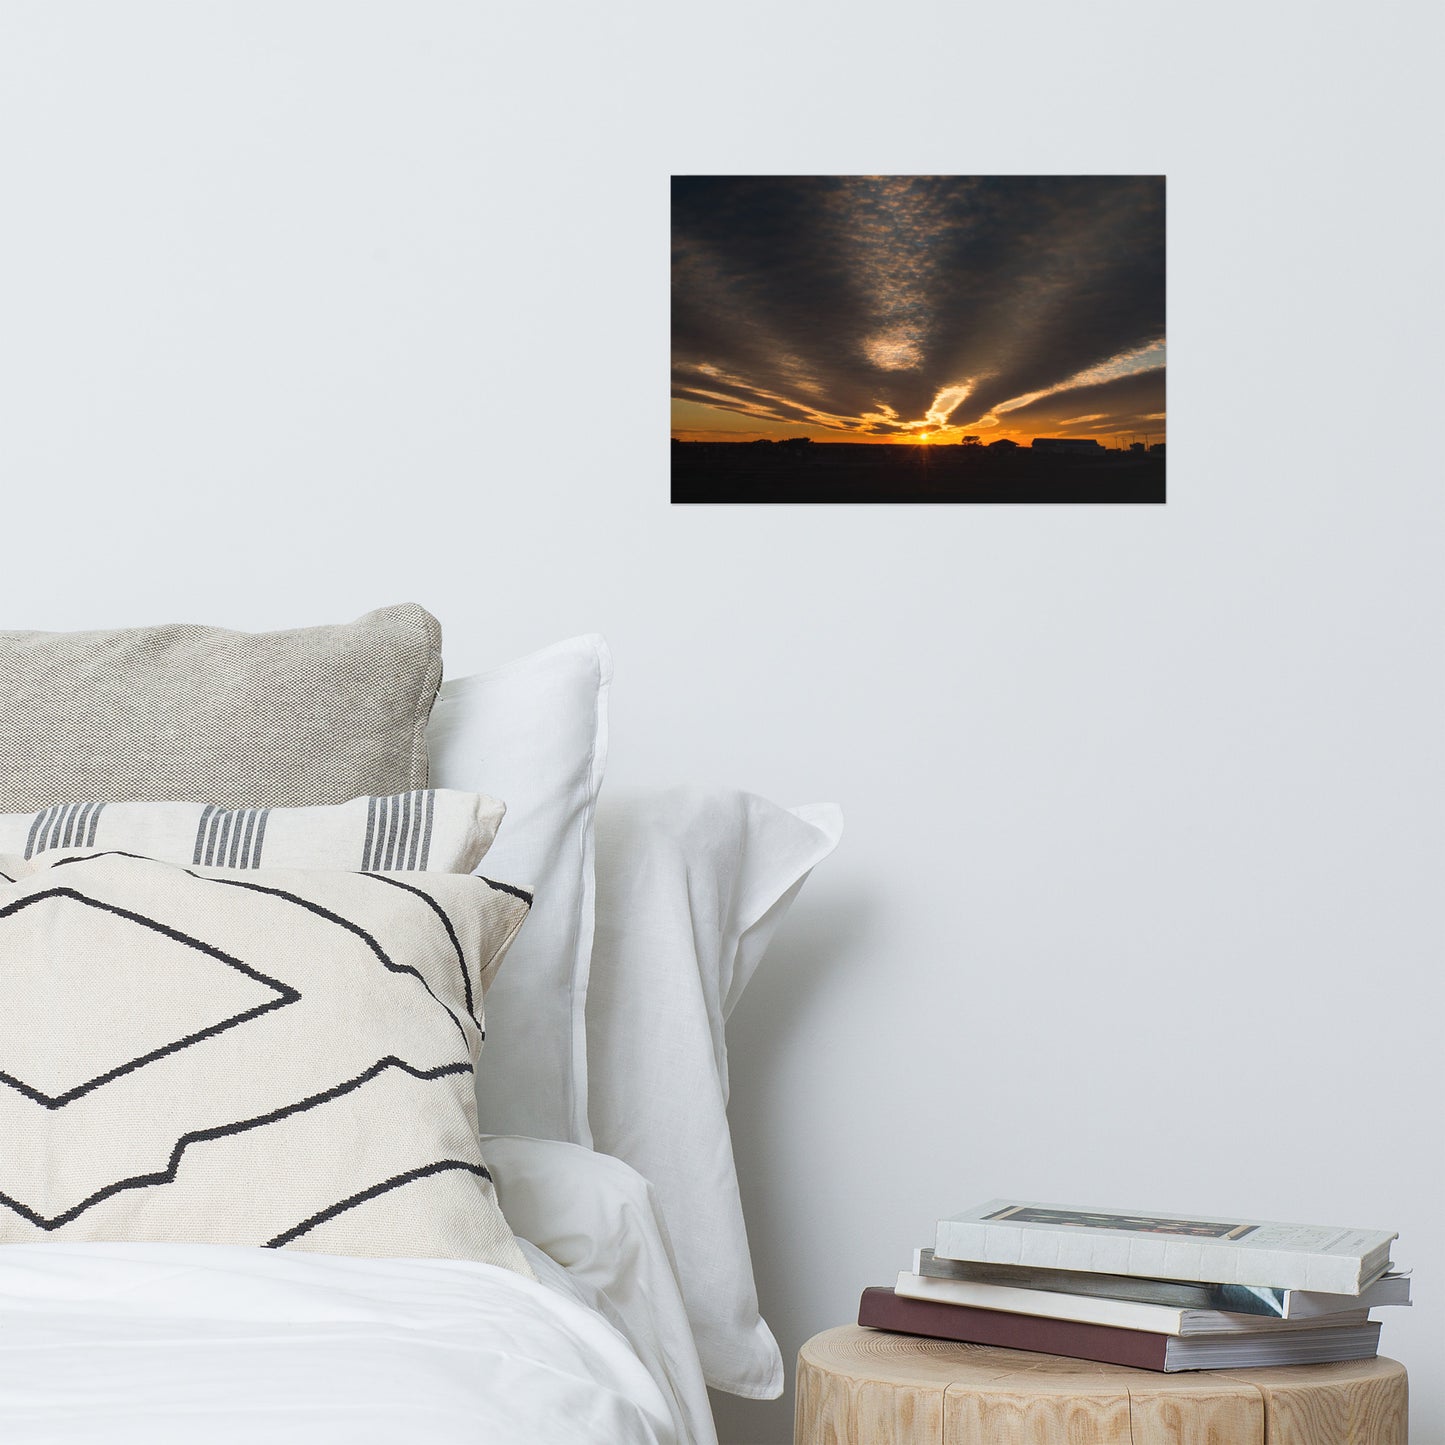 Sunset Indian River Inlet Landscape Photo Loose Wall Art Prints